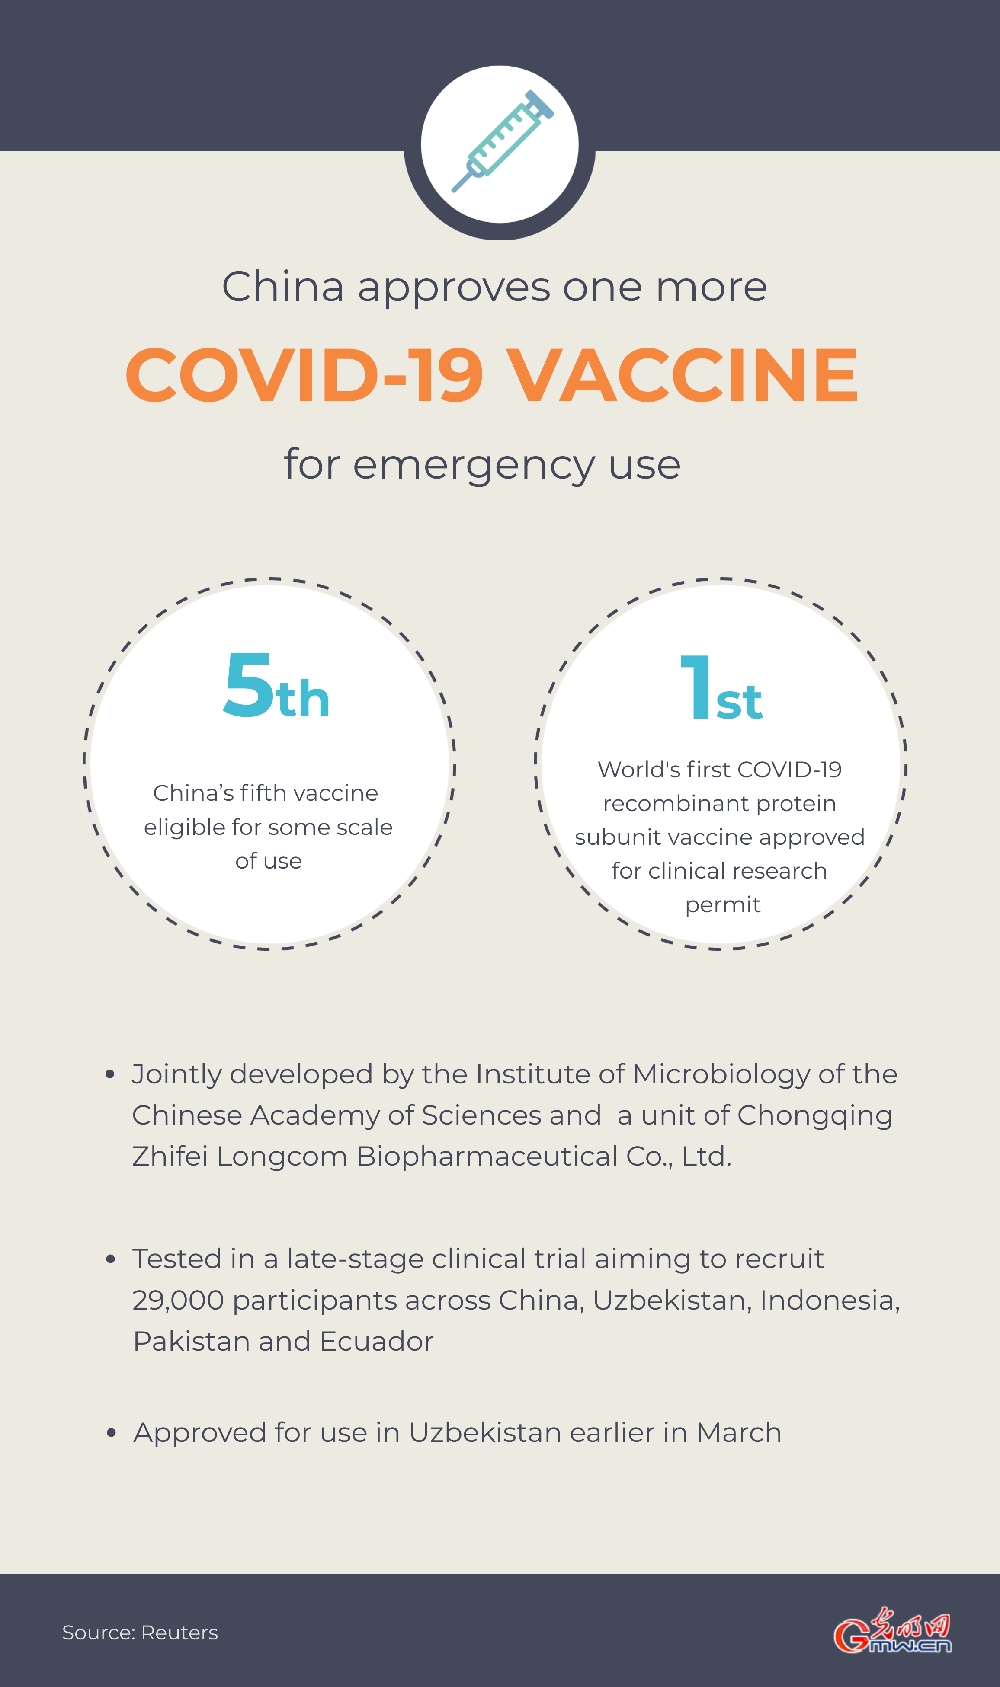 China approves one more COVID-19 vaccine for emergency use